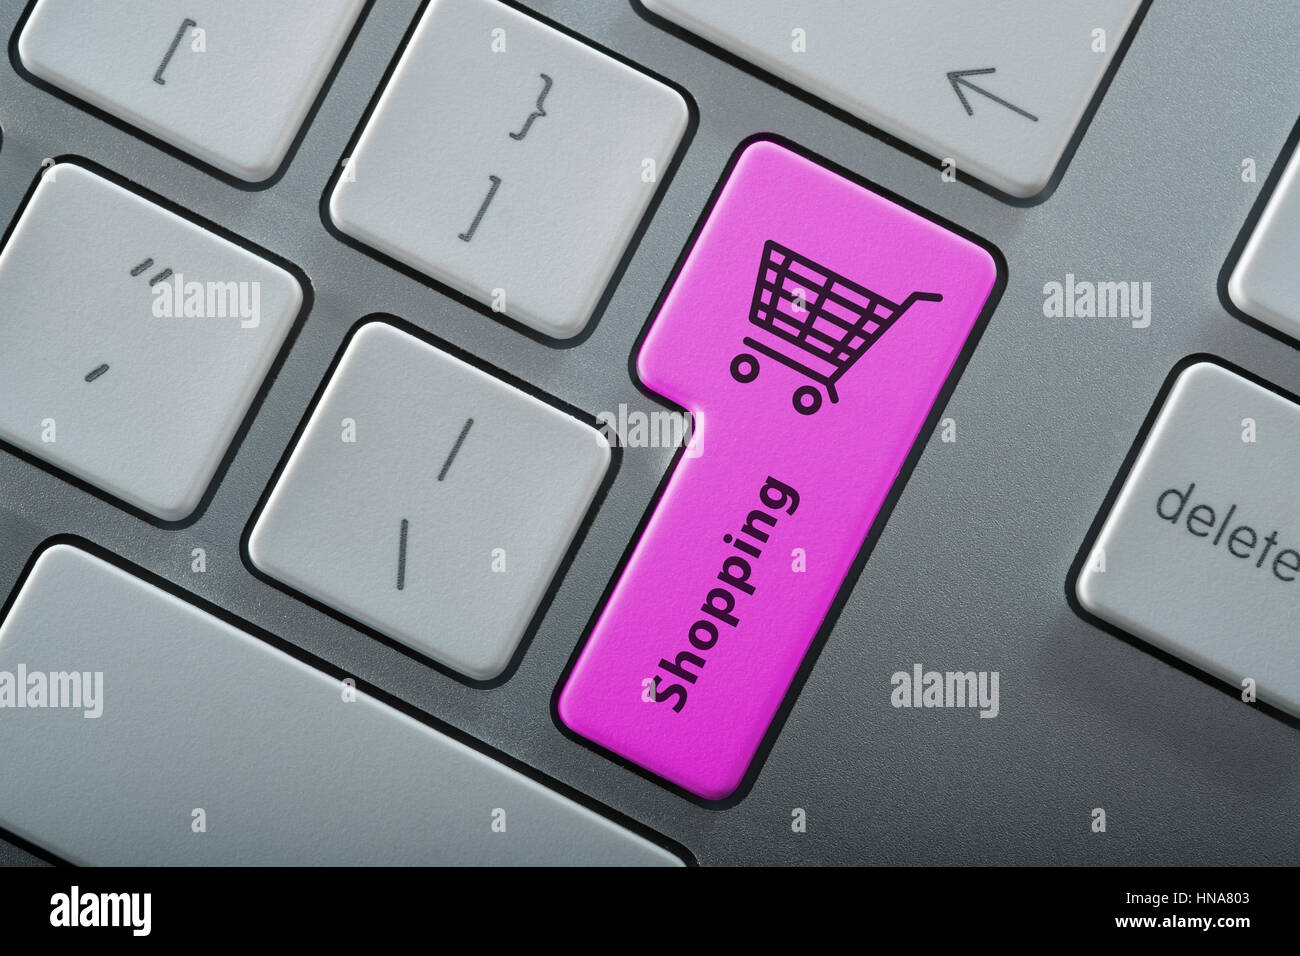 Online shopping - computer keyboard with Shopping Cart symbol Stock Photo